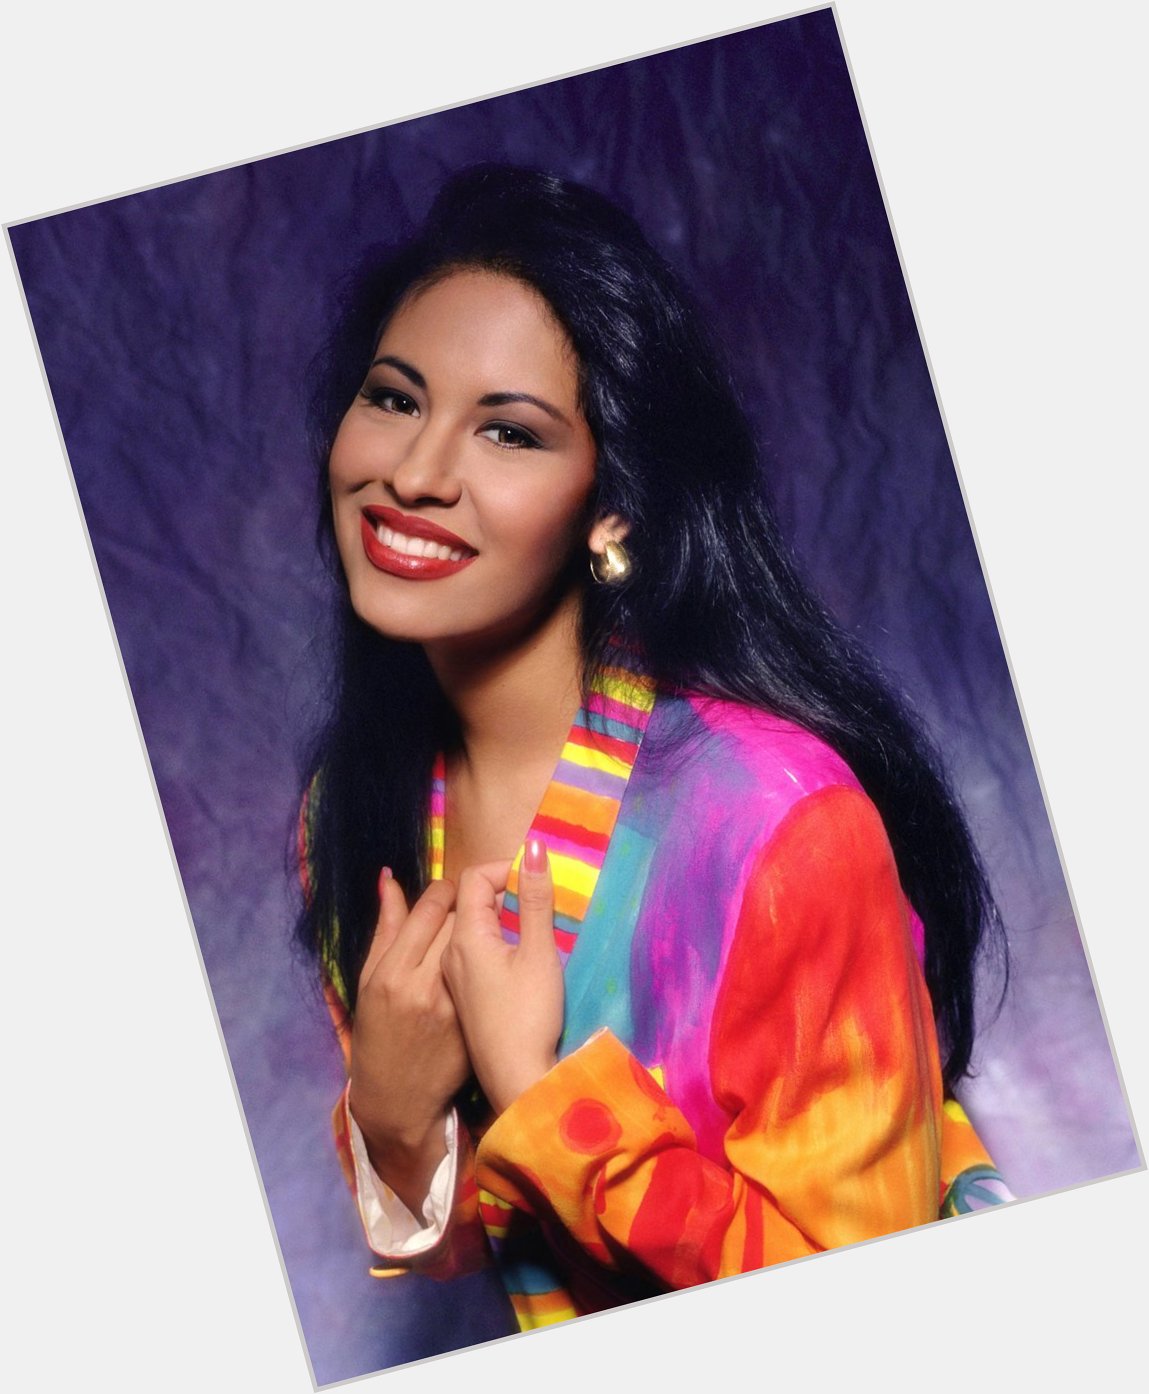 Selena Quintanilla would\ve turned 51 today. Happy Birthday & may she continue to rest in peace.    